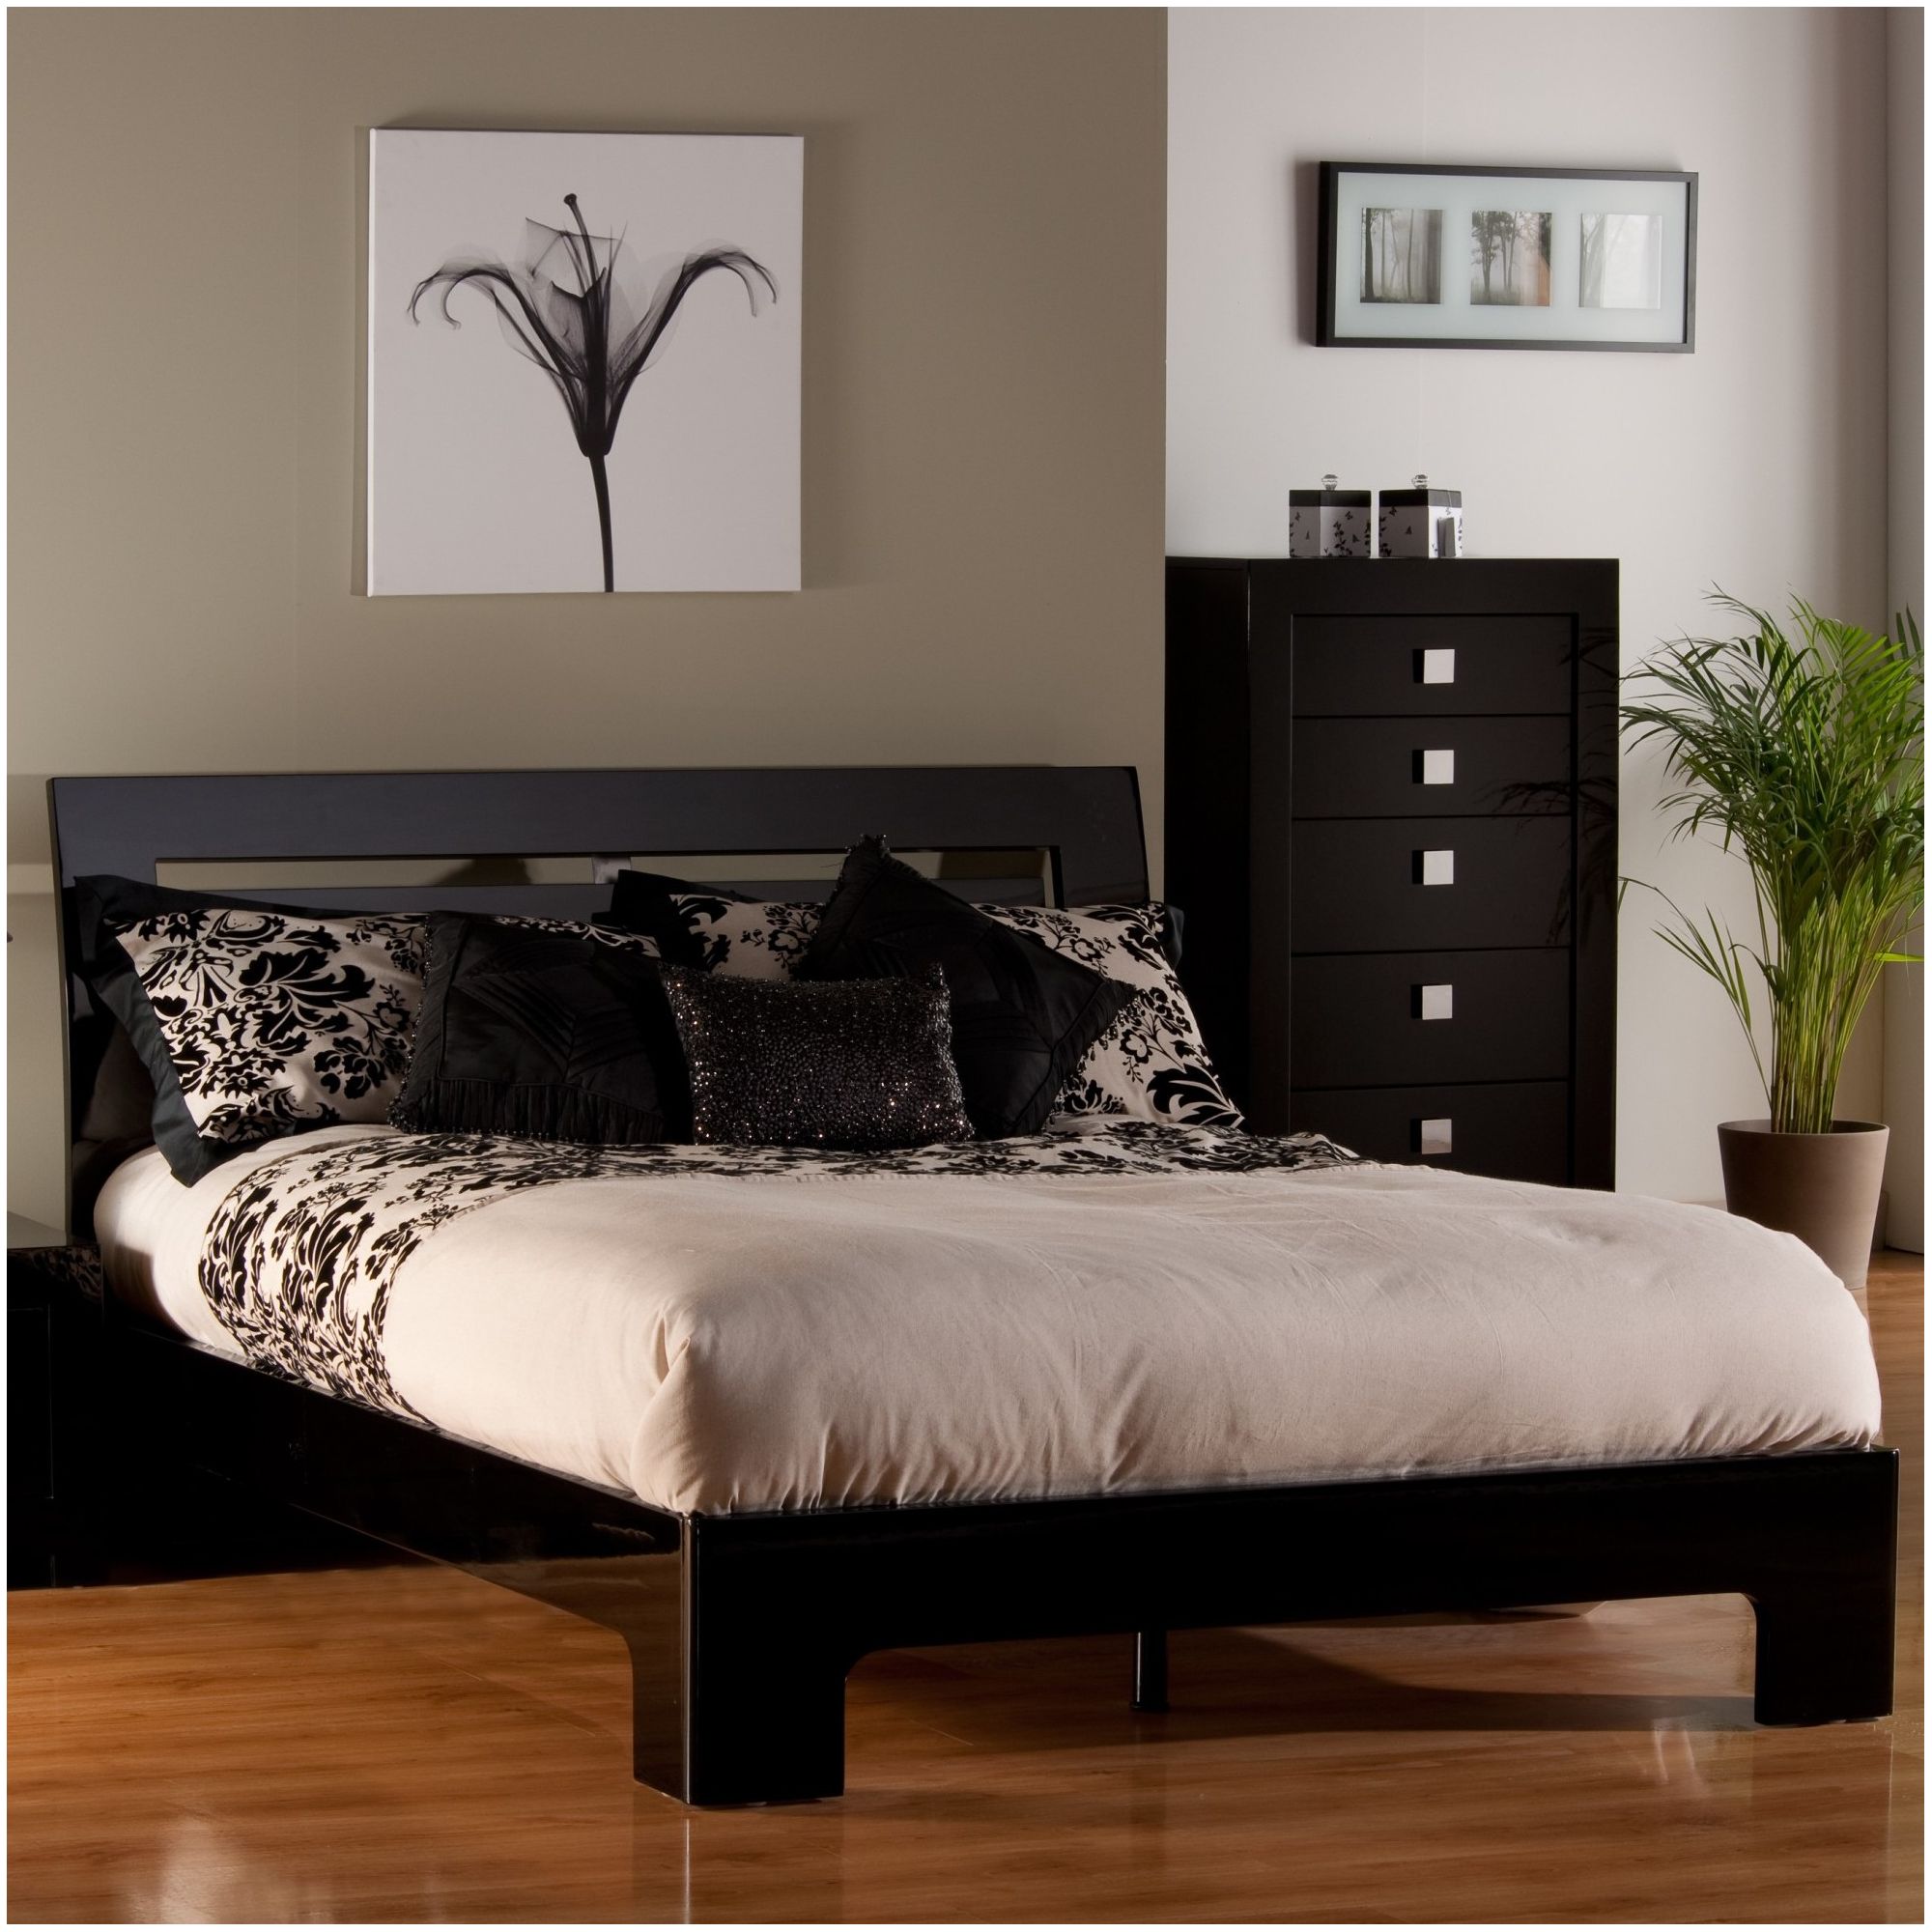 World Furniture Modena Bed Frame - Double at Tesco Direct